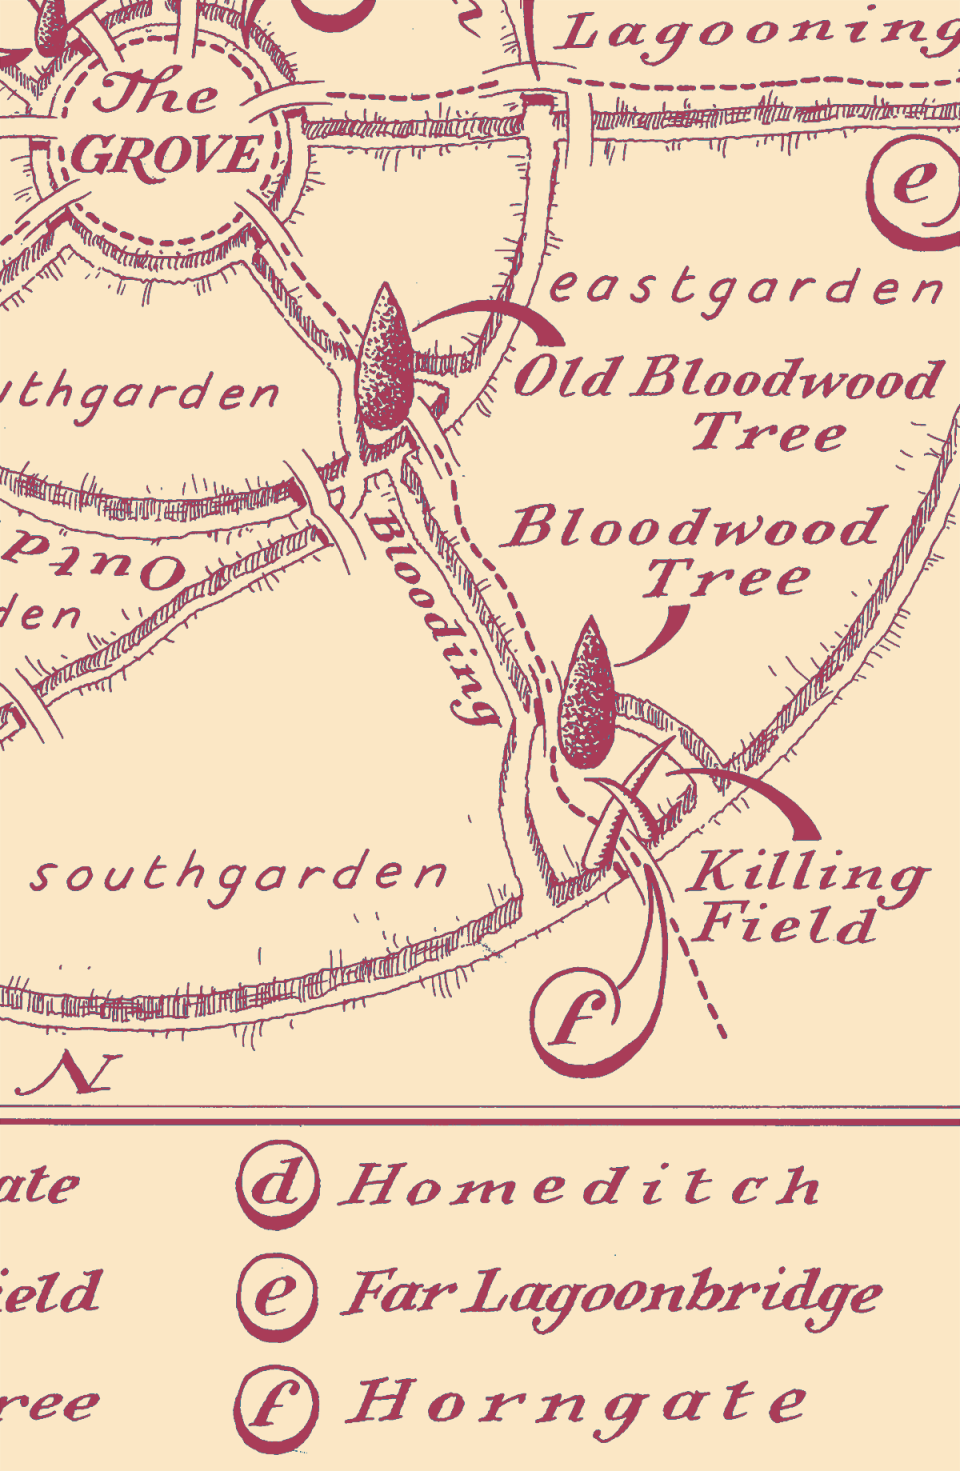 map detail showing location of the Bloodwood Tree